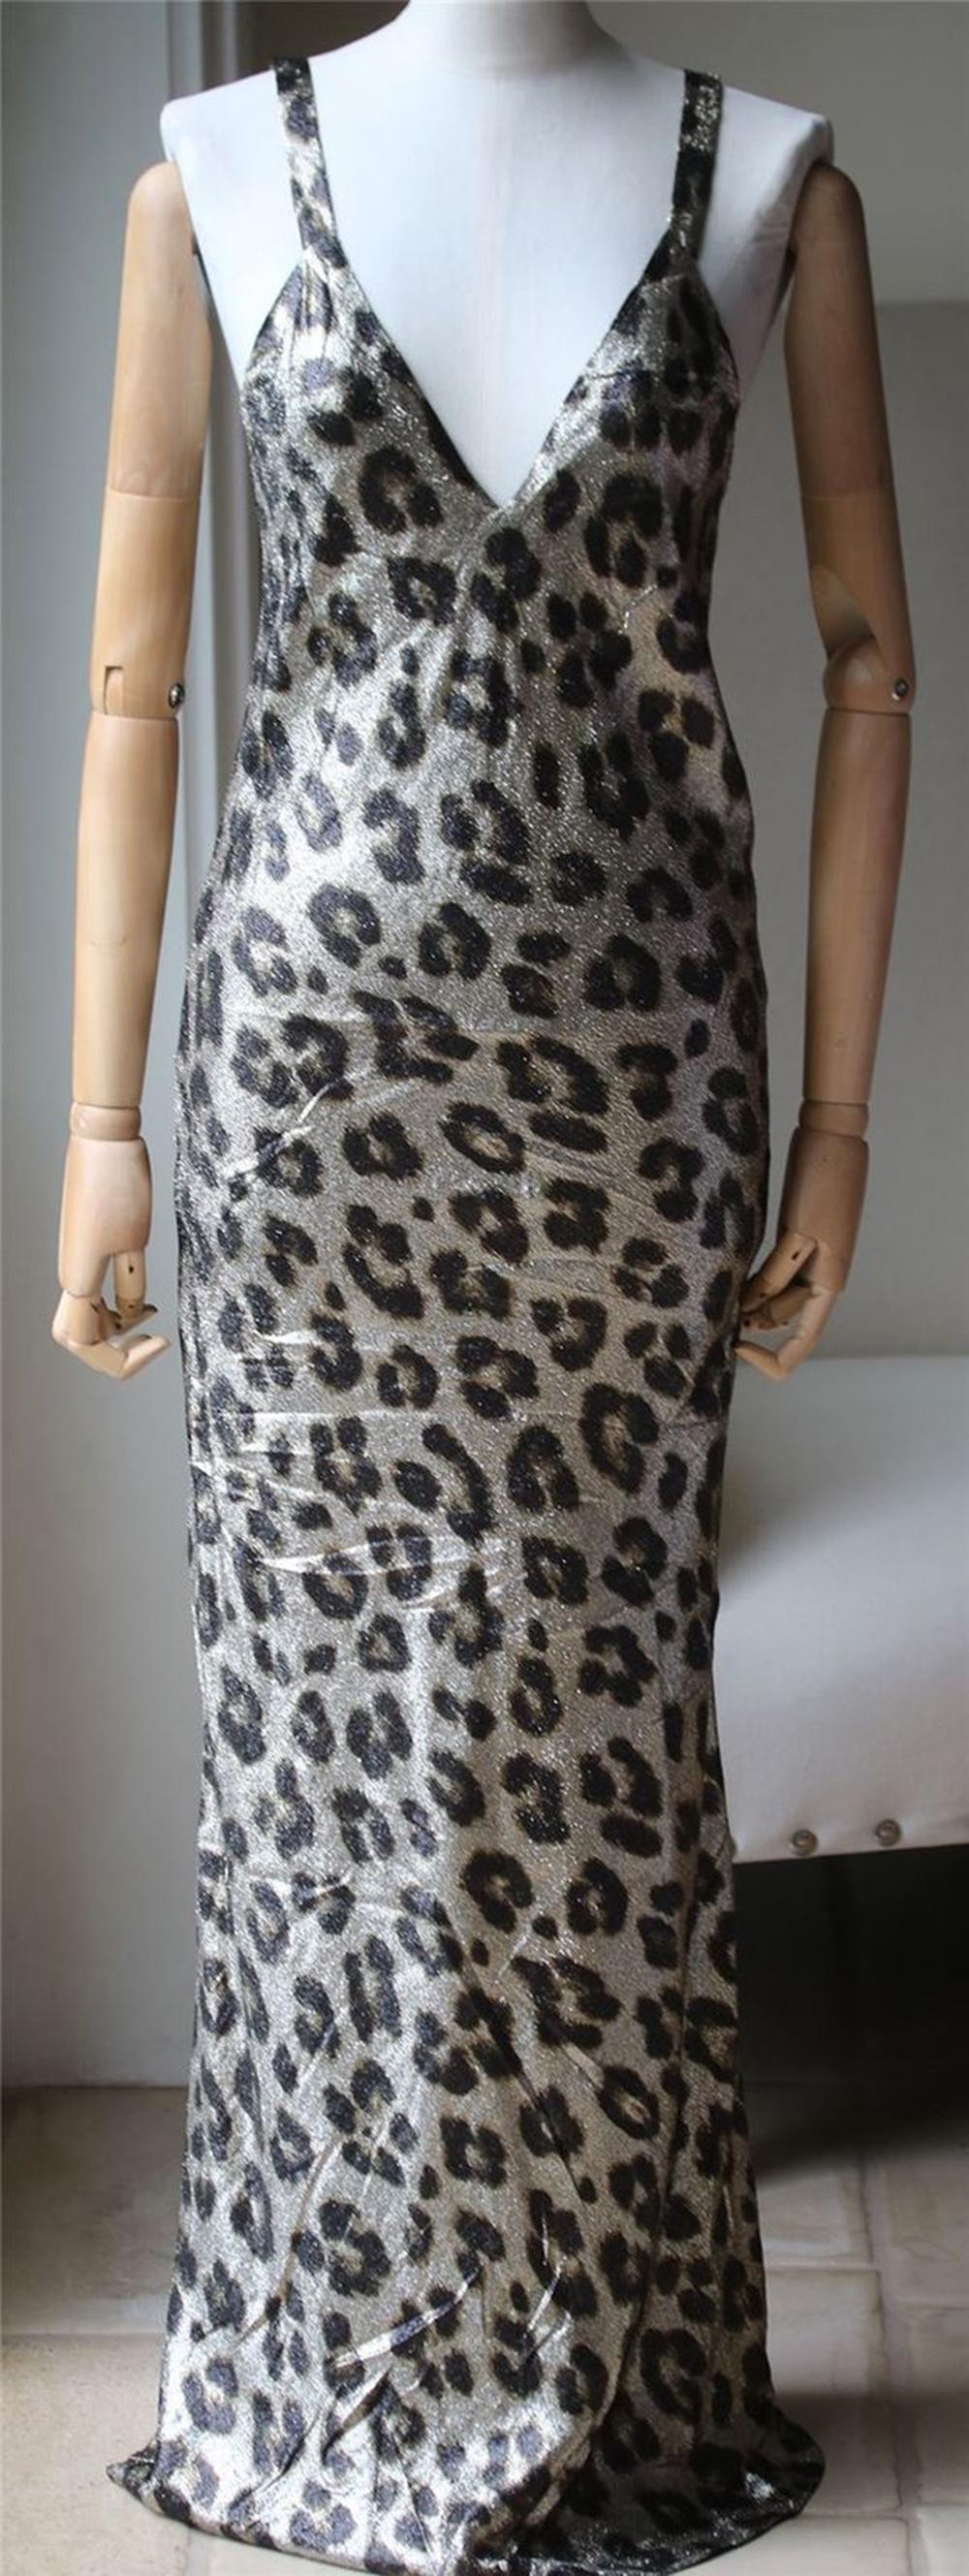 Silver-tone silk blend Andomeda long dress from Haider Ackermann. 61% Silk, 35% polyester, 4% spandex/elastane. Lining: 100% silk.

Size: FR 36 (UK 8, US 4, IT 40)

Condition: As new condition, no sign of wear. 